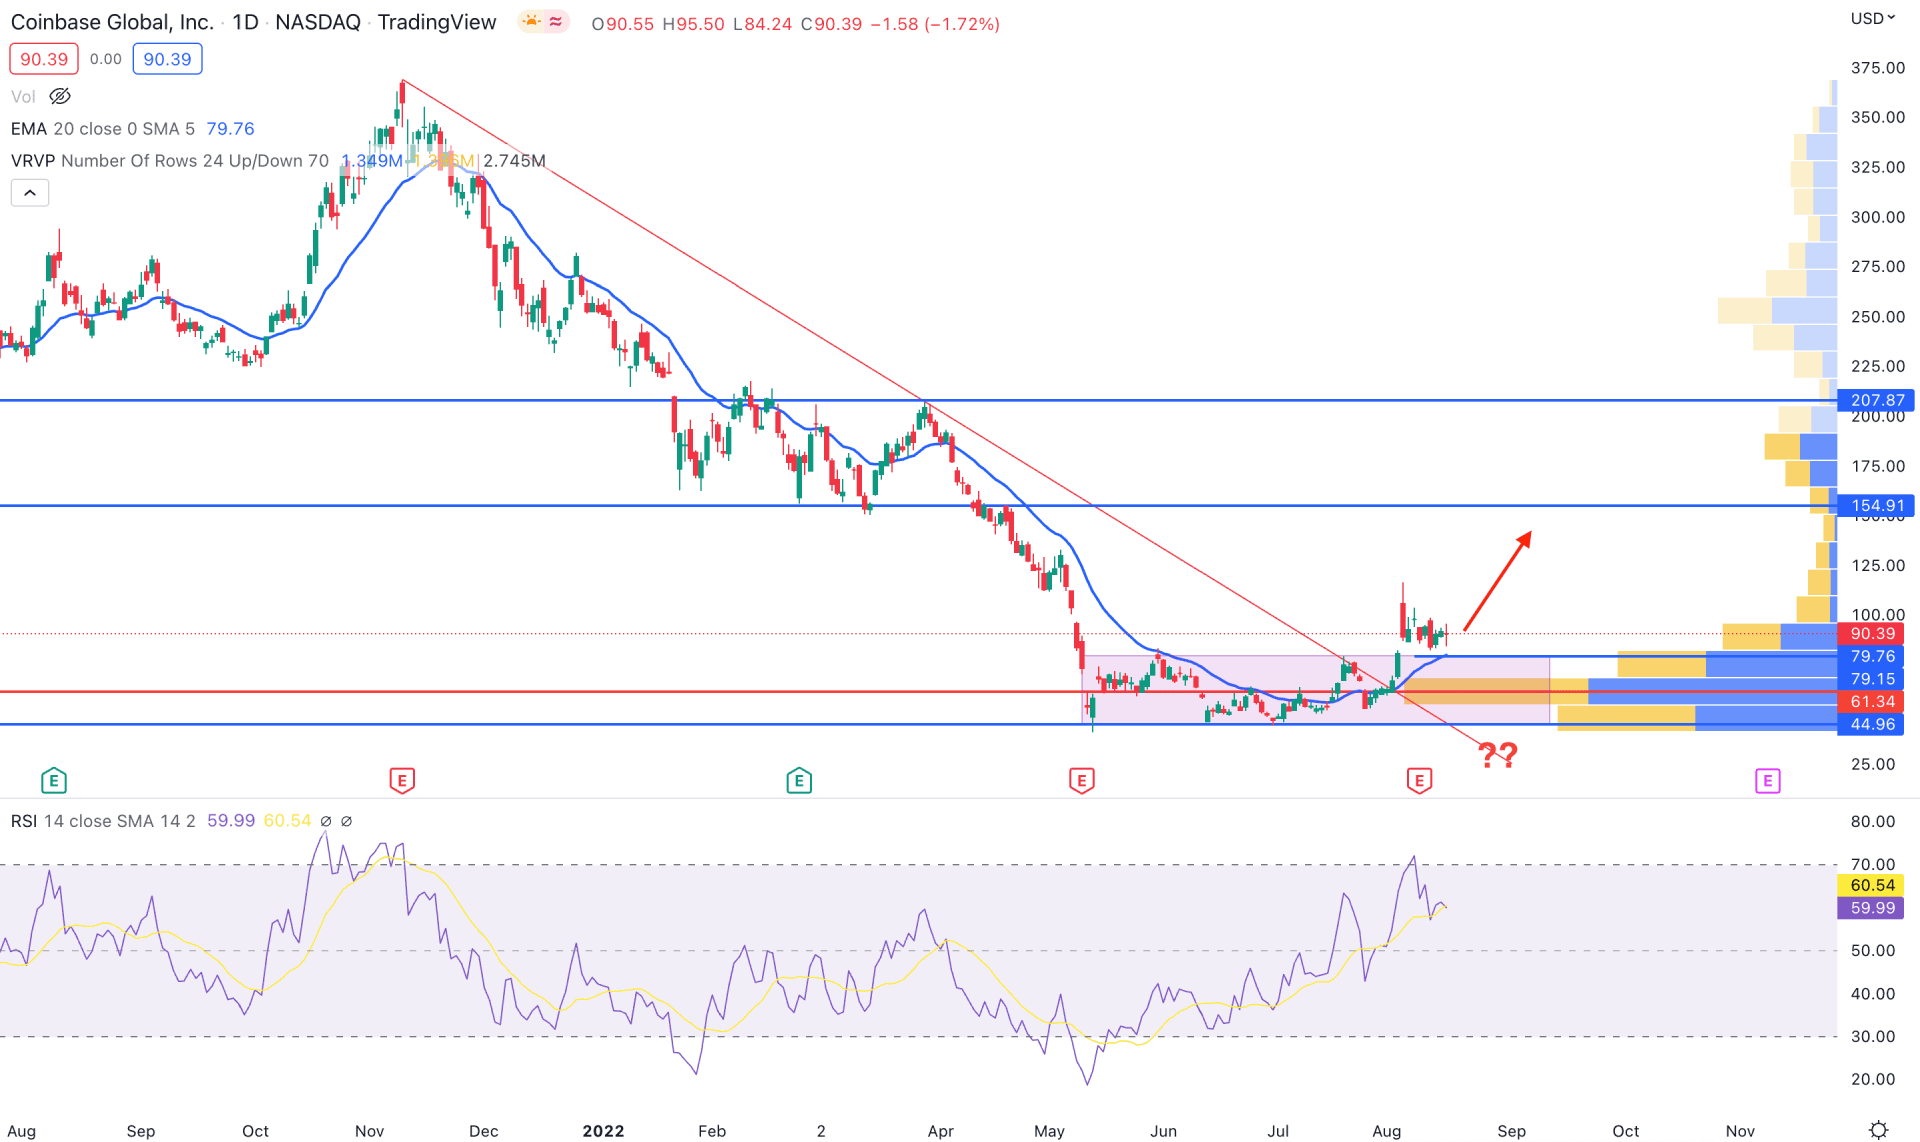 Coinbase Stock (COIN) Daily Technical Analysis 17th August 2022